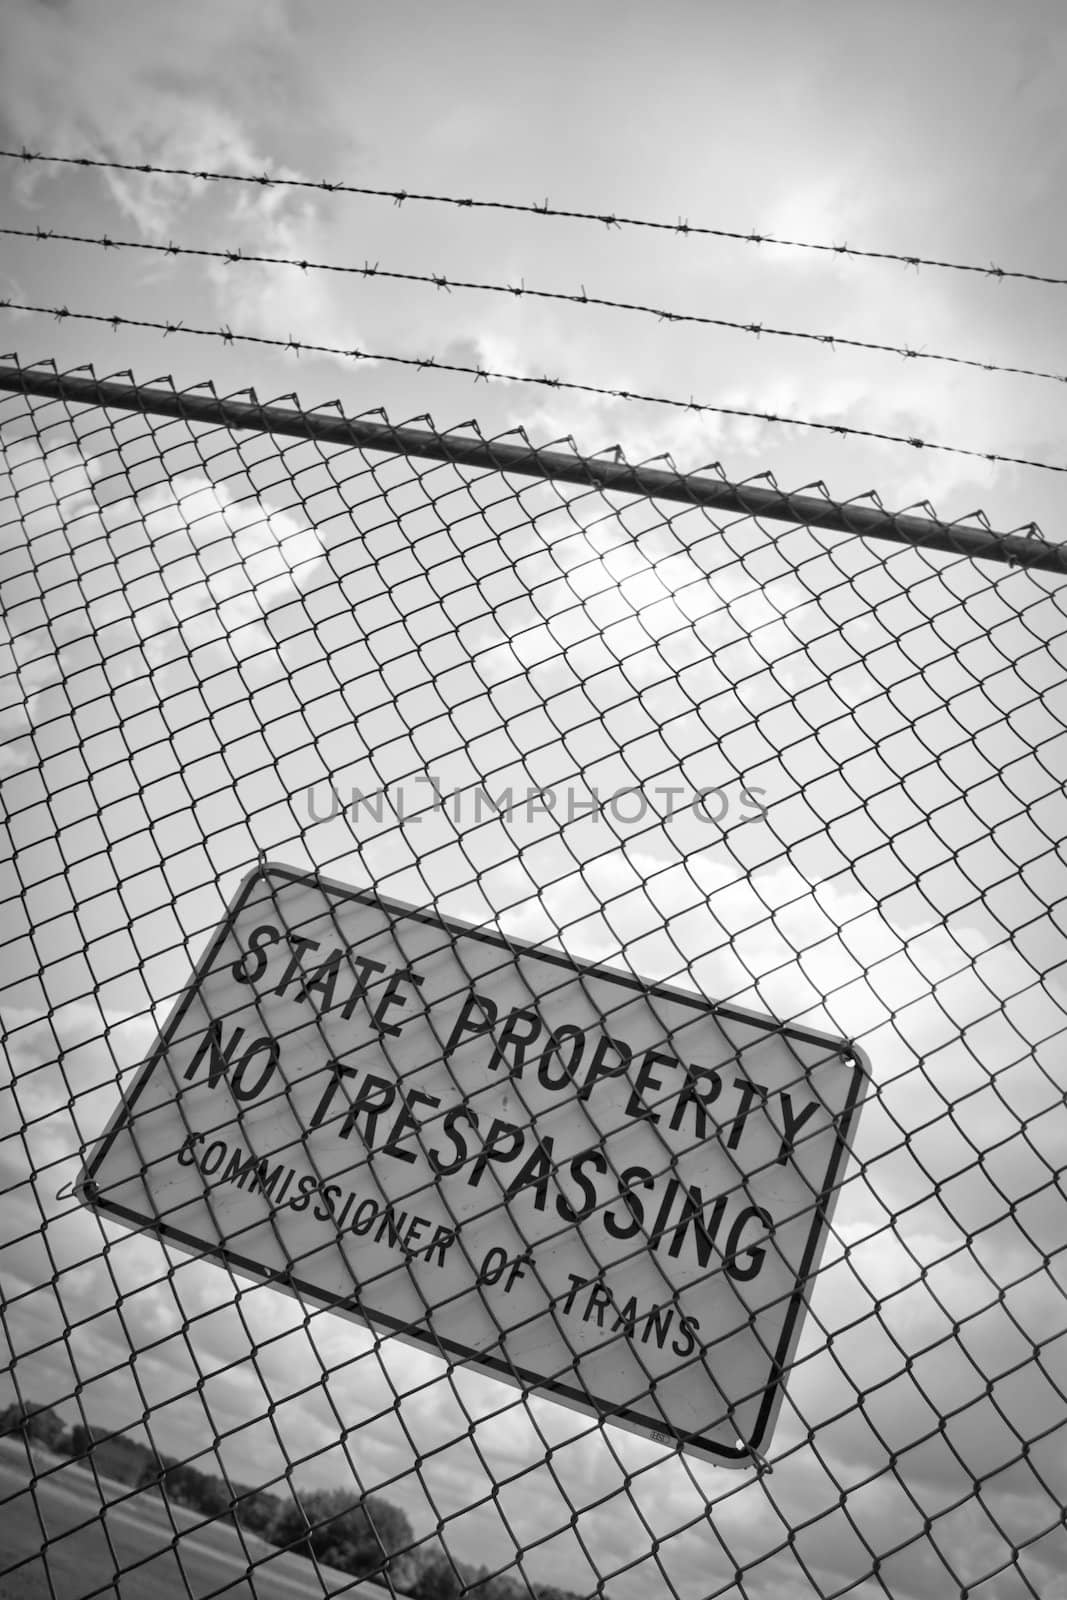 A no trespassing sign that reads STATE PROPERTY NO TRESPASSING outside an airport.